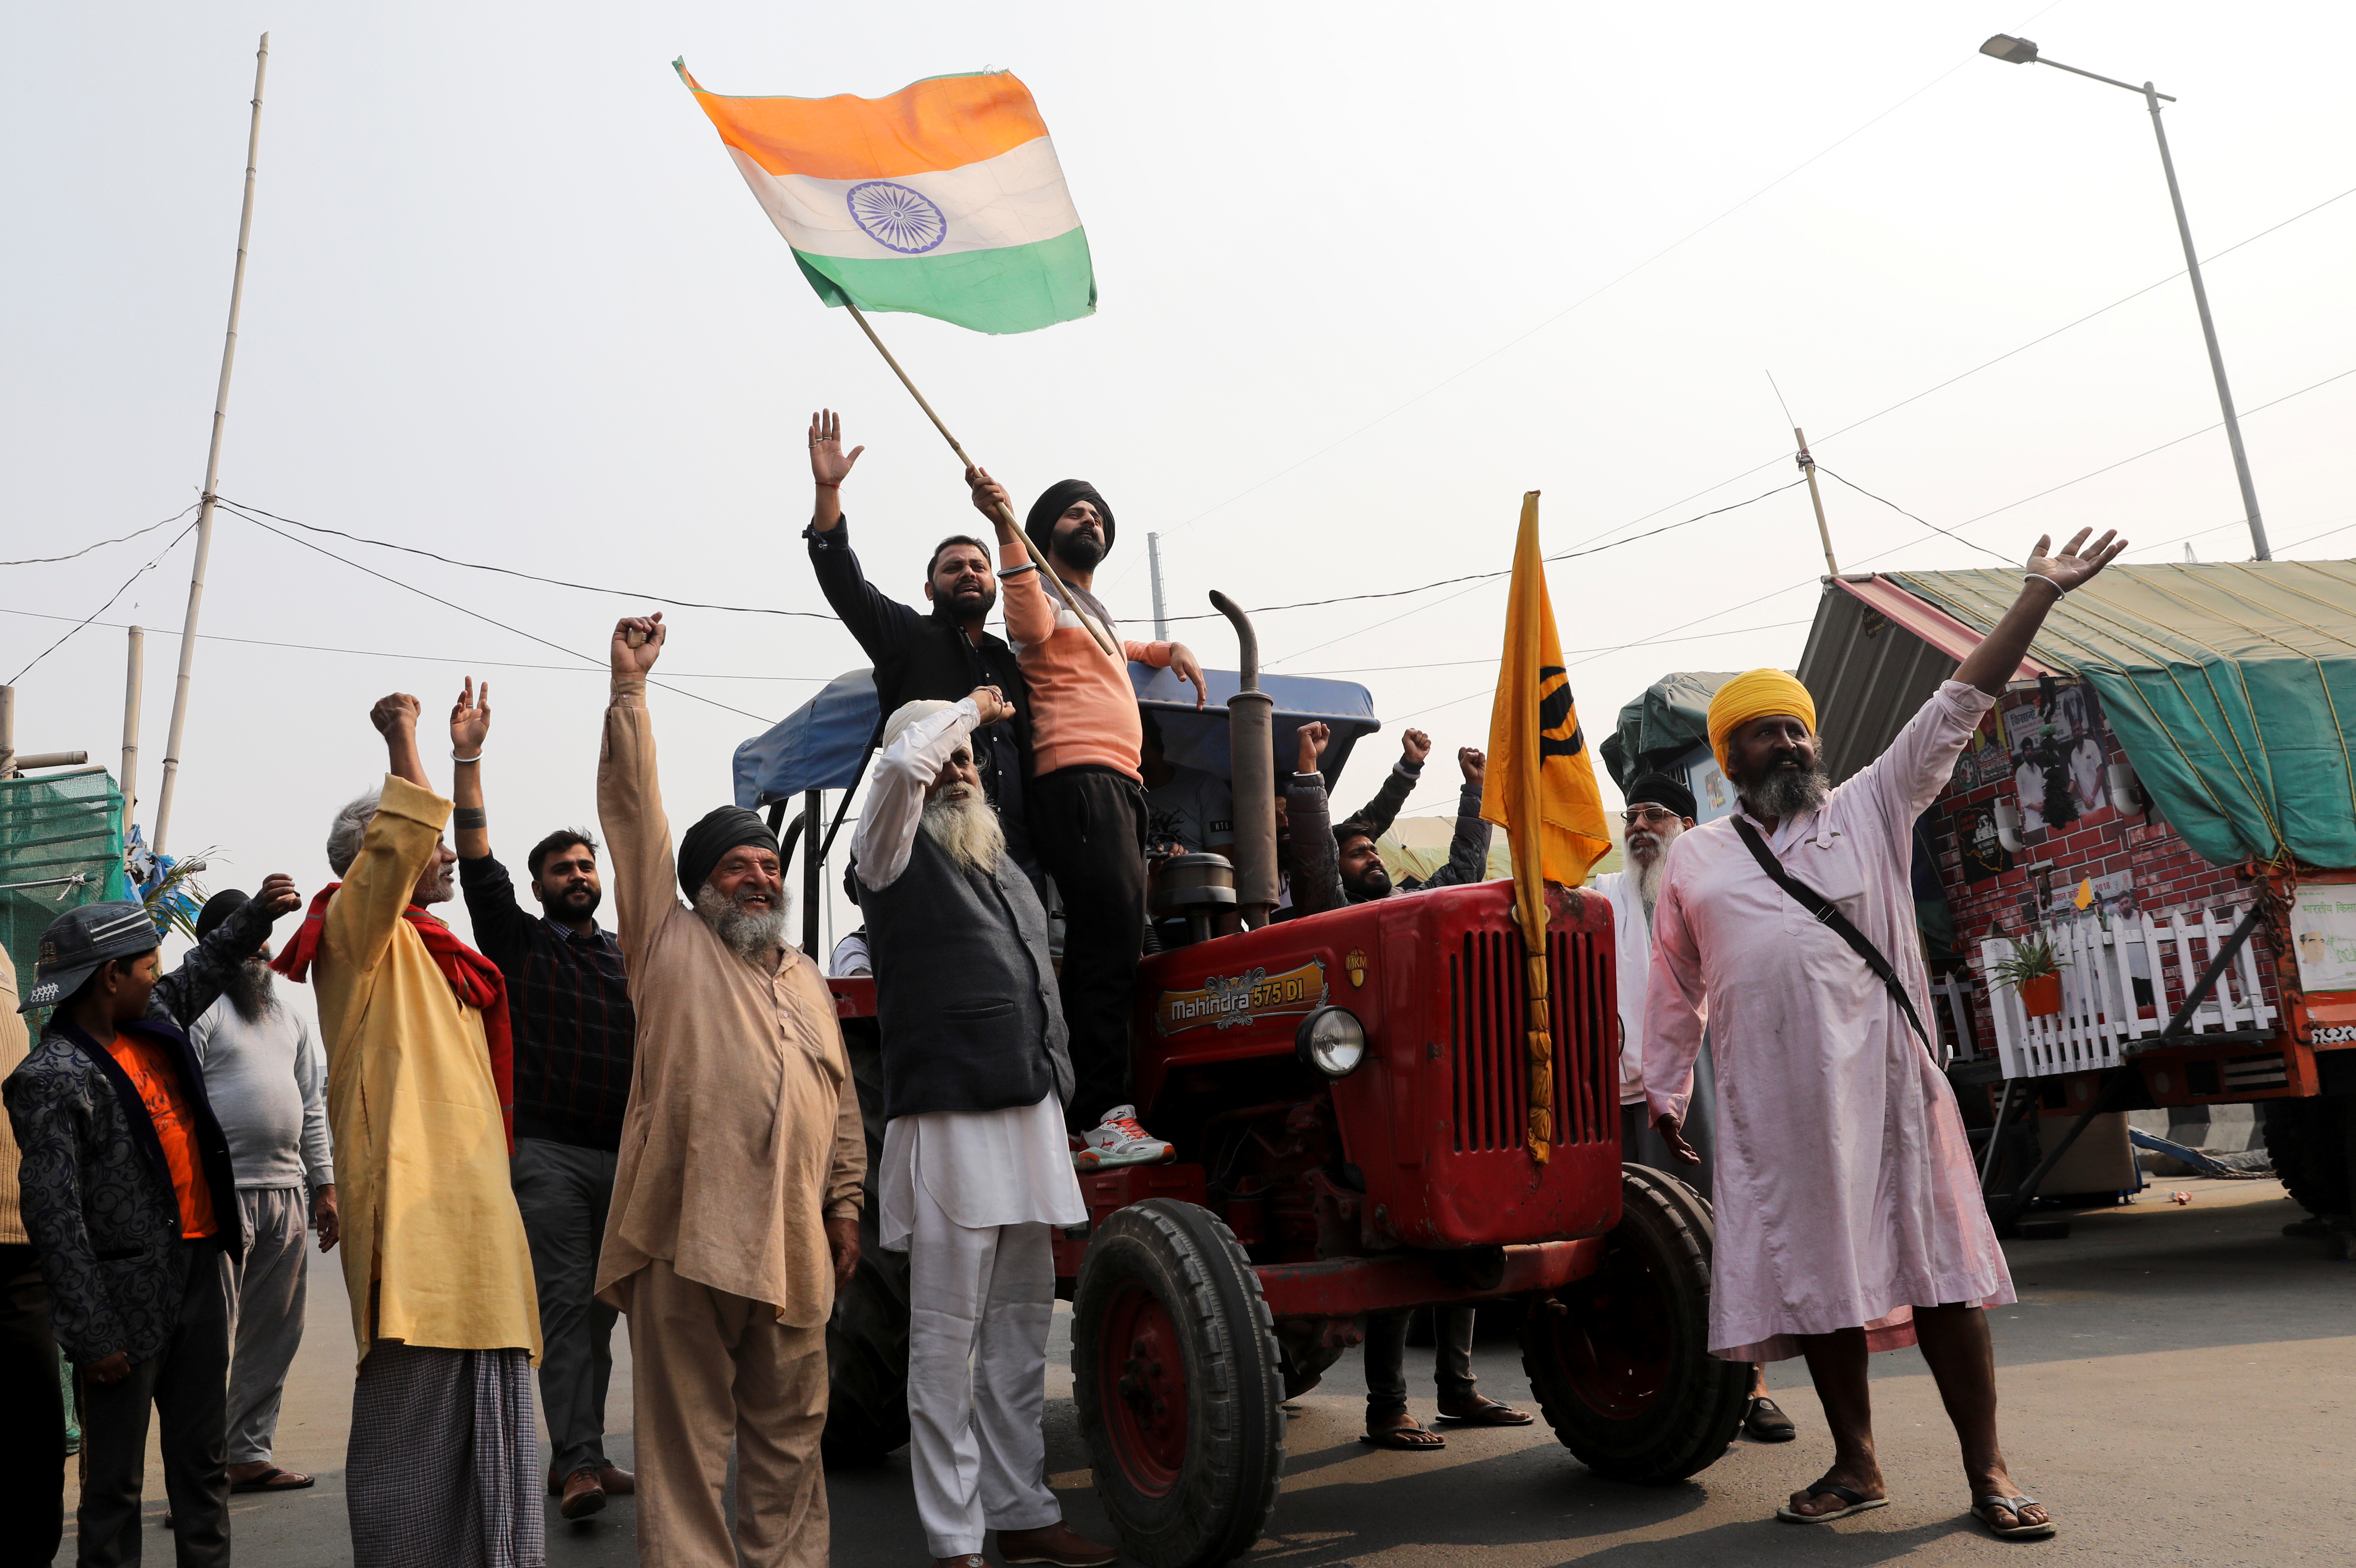 Farmers celebrate after Indian Prime Minister Narendra Modi announced that he will repeal the controversial farm laws, at the Ghazipur farmers protest site near Delhi-UP border, India, November 19, 2021. REUTERS/Anushree Fadnavis